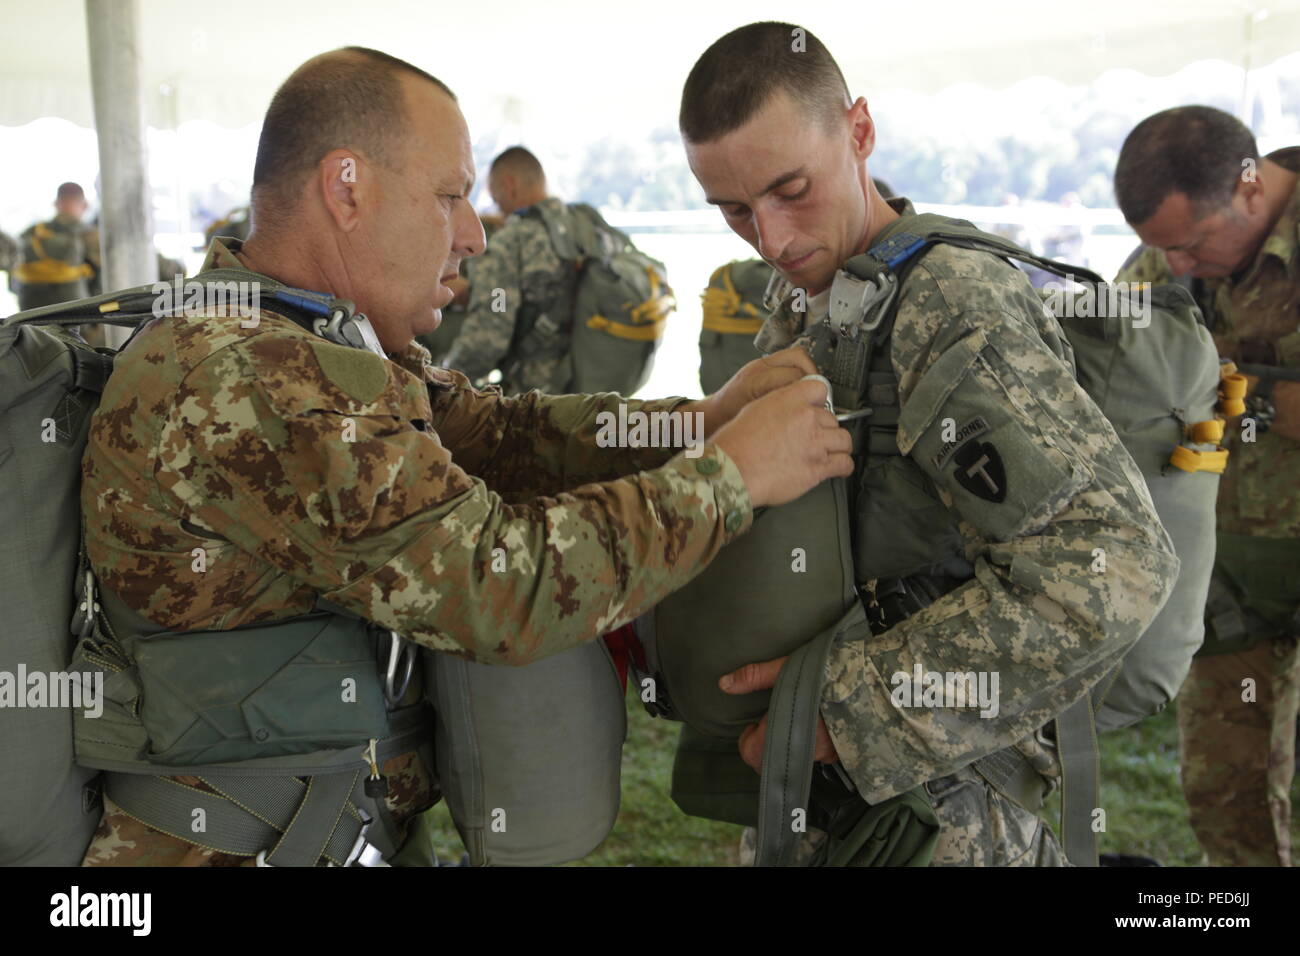 Italian 1st Lt. Antonio Nucera aids U.S. Army Staff Sgt. Paul Norwood from B Company, 1st Battalion, 143rd Infantry Regiment, Alaska National Guard, check the attachment of his reserve parachute for the wing exchange jump, Aug. 3, 2015. Leapfest is an International parachute competition hosted by the 56th Troop Command, Rhode Island National Guard to promote high level technical training and esprit de corps within the International Airborne community. (U.S. Army Photo by Sgt. 1st Class Horace Murray/Released) Stock Photo